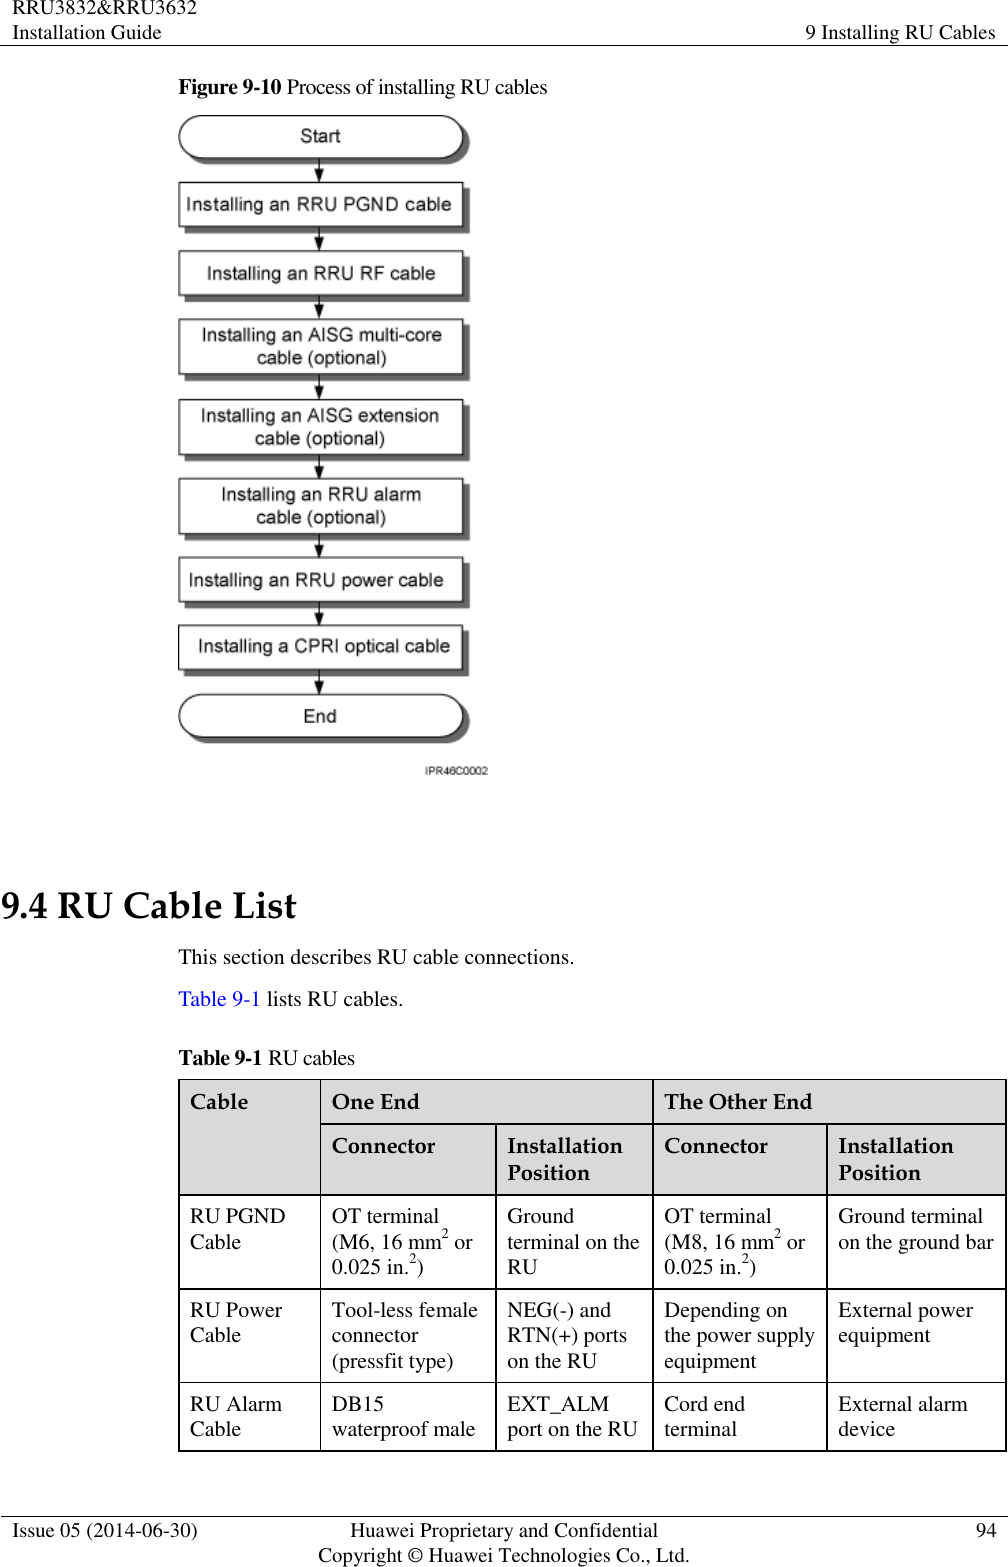 RRU3832&amp;RRU3632 Installation Guide 9 Installing RU Cables  Issue 05 (2014-06-30) Huawei Proprietary and Confidential                                     Copyright © Huawei Technologies Co., Ltd. 94  Figure 9-10 Process of installing RU cables   9.4 RU Cable List This section describes RU cable connections. Table 9-1 lists RU cables. Table 9-1 RU cables Cable One End The Other End Connector Installation Position Connector Installation Position RU PGND Cable OT terminal (M6, 16 mm2 or 0.025 in.2) Ground terminal on the RU OT terminal (M8, 16 mm2 or 0.025 in.2) Ground terminal on the ground bar RU Power Cable Tool-less female connector (pressfit type) NEG(-) and RTN(+) ports on the RU Depending on the power supply equipment External power equipment RU Alarm Cable DB15 waterproof male EXT_ALM port on the RU Cord end terminal External alarm device 